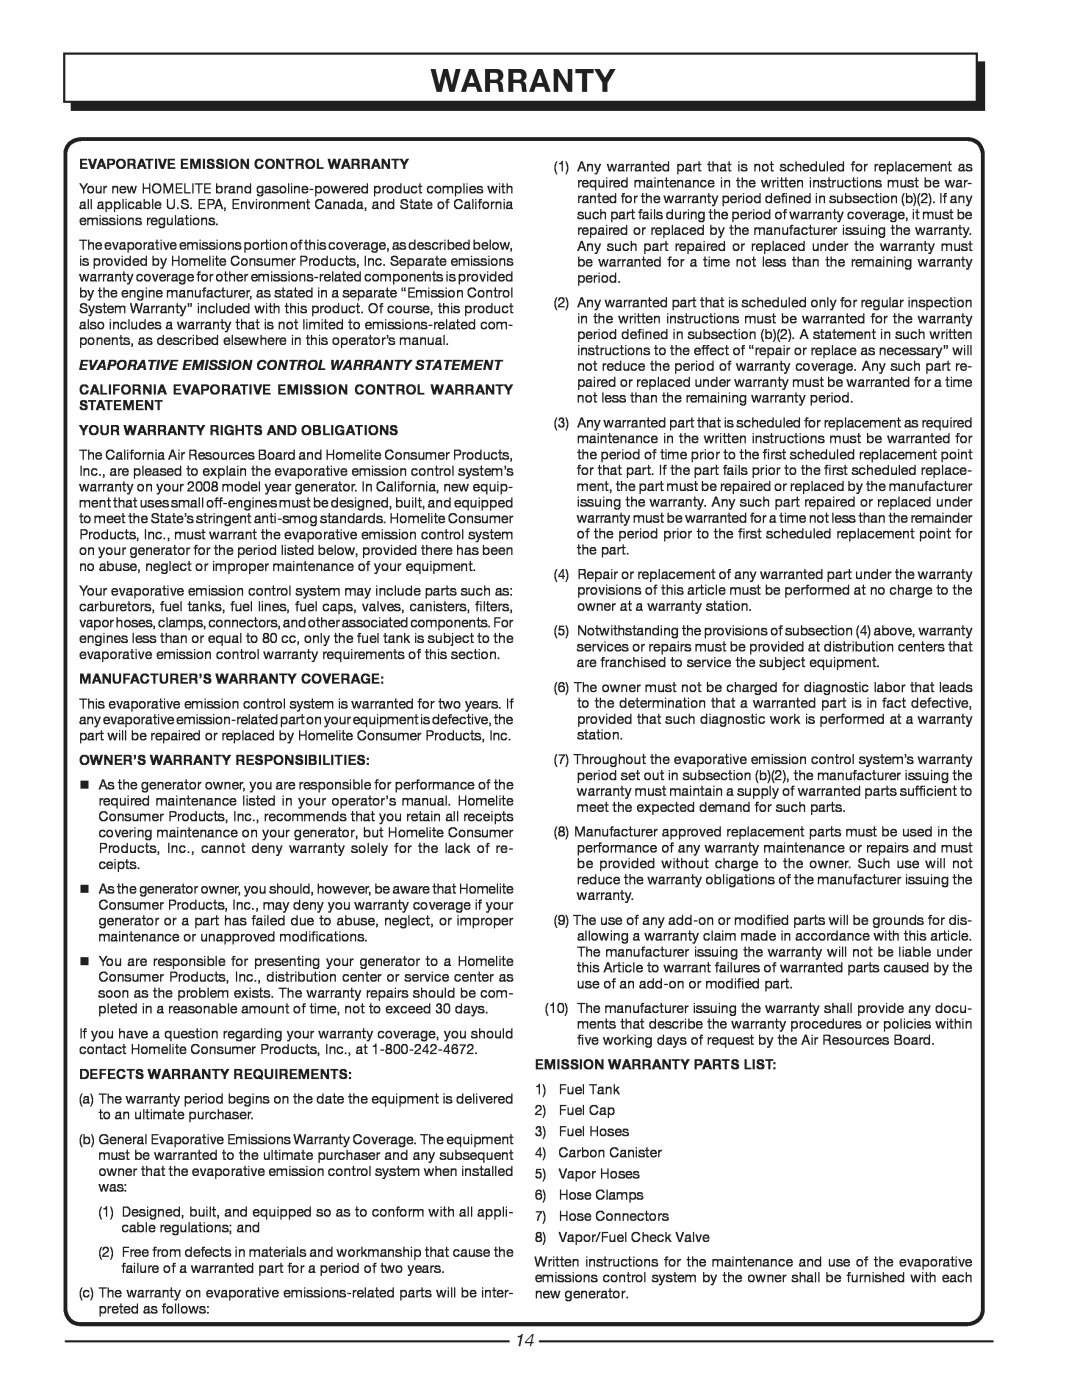 Homelite HG3510 Evaporative Emission Control Warranty Statement, Your Warranty Rights And Obligations 